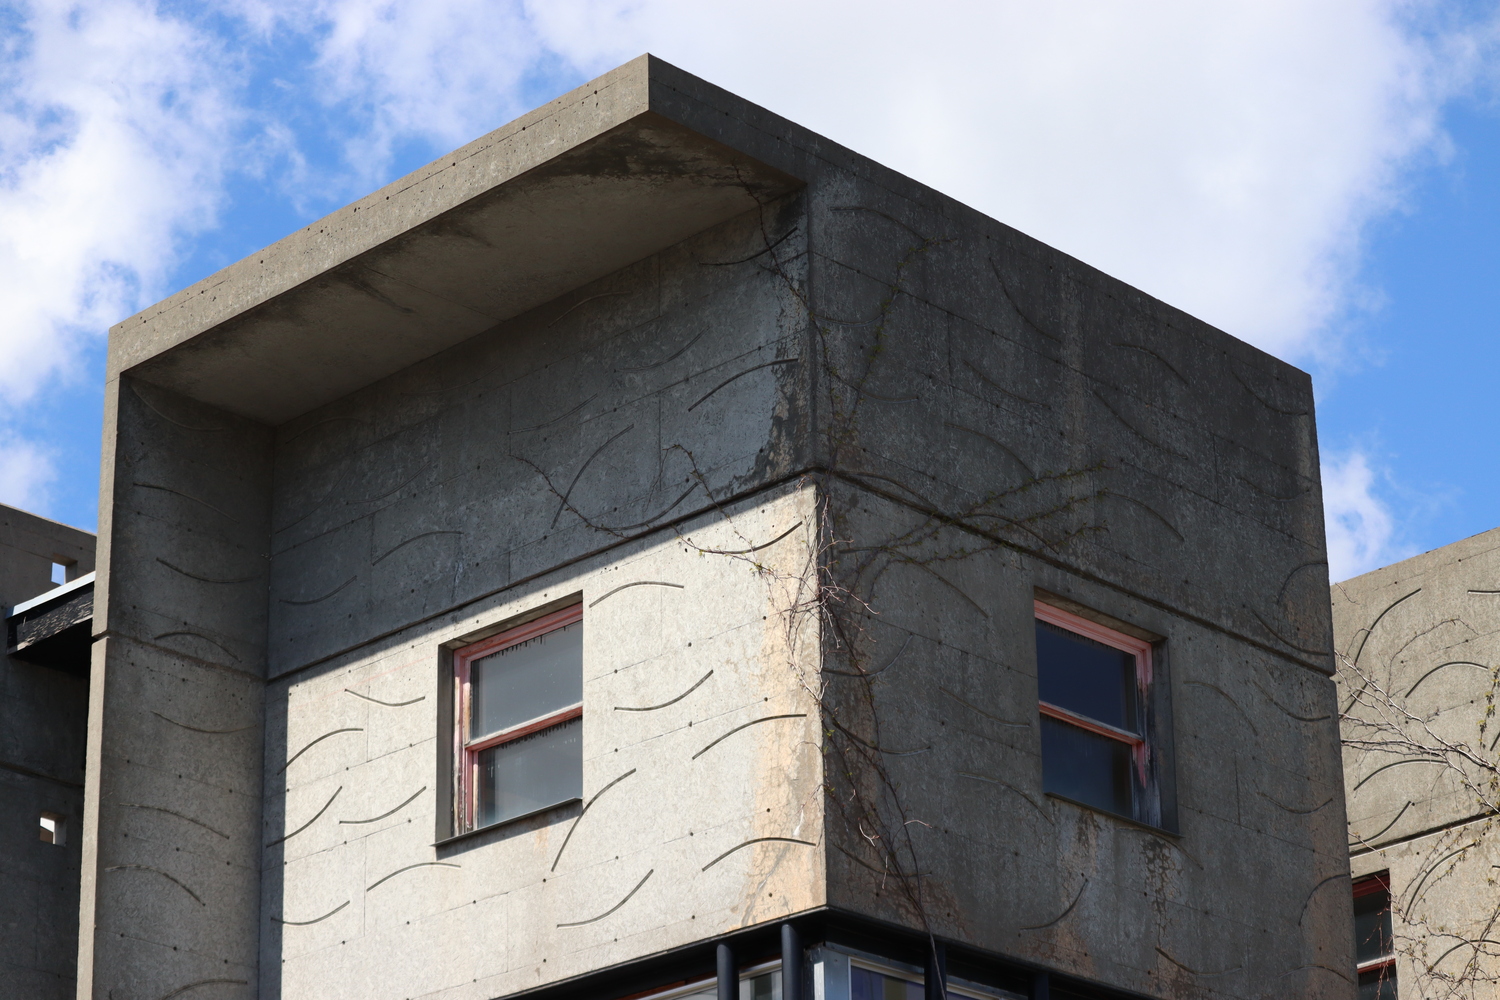 the top cube of a brutalist house,
with one small window
in each the centre of each face.
the left face of the cube
has an overhang above
which continues down the side.
the concrete has large curved grooves
scattered over its surface.
the sun is hitting the left face,
shadowed by the overhang.
behind the cube is a blue sky
with scattered clouds.